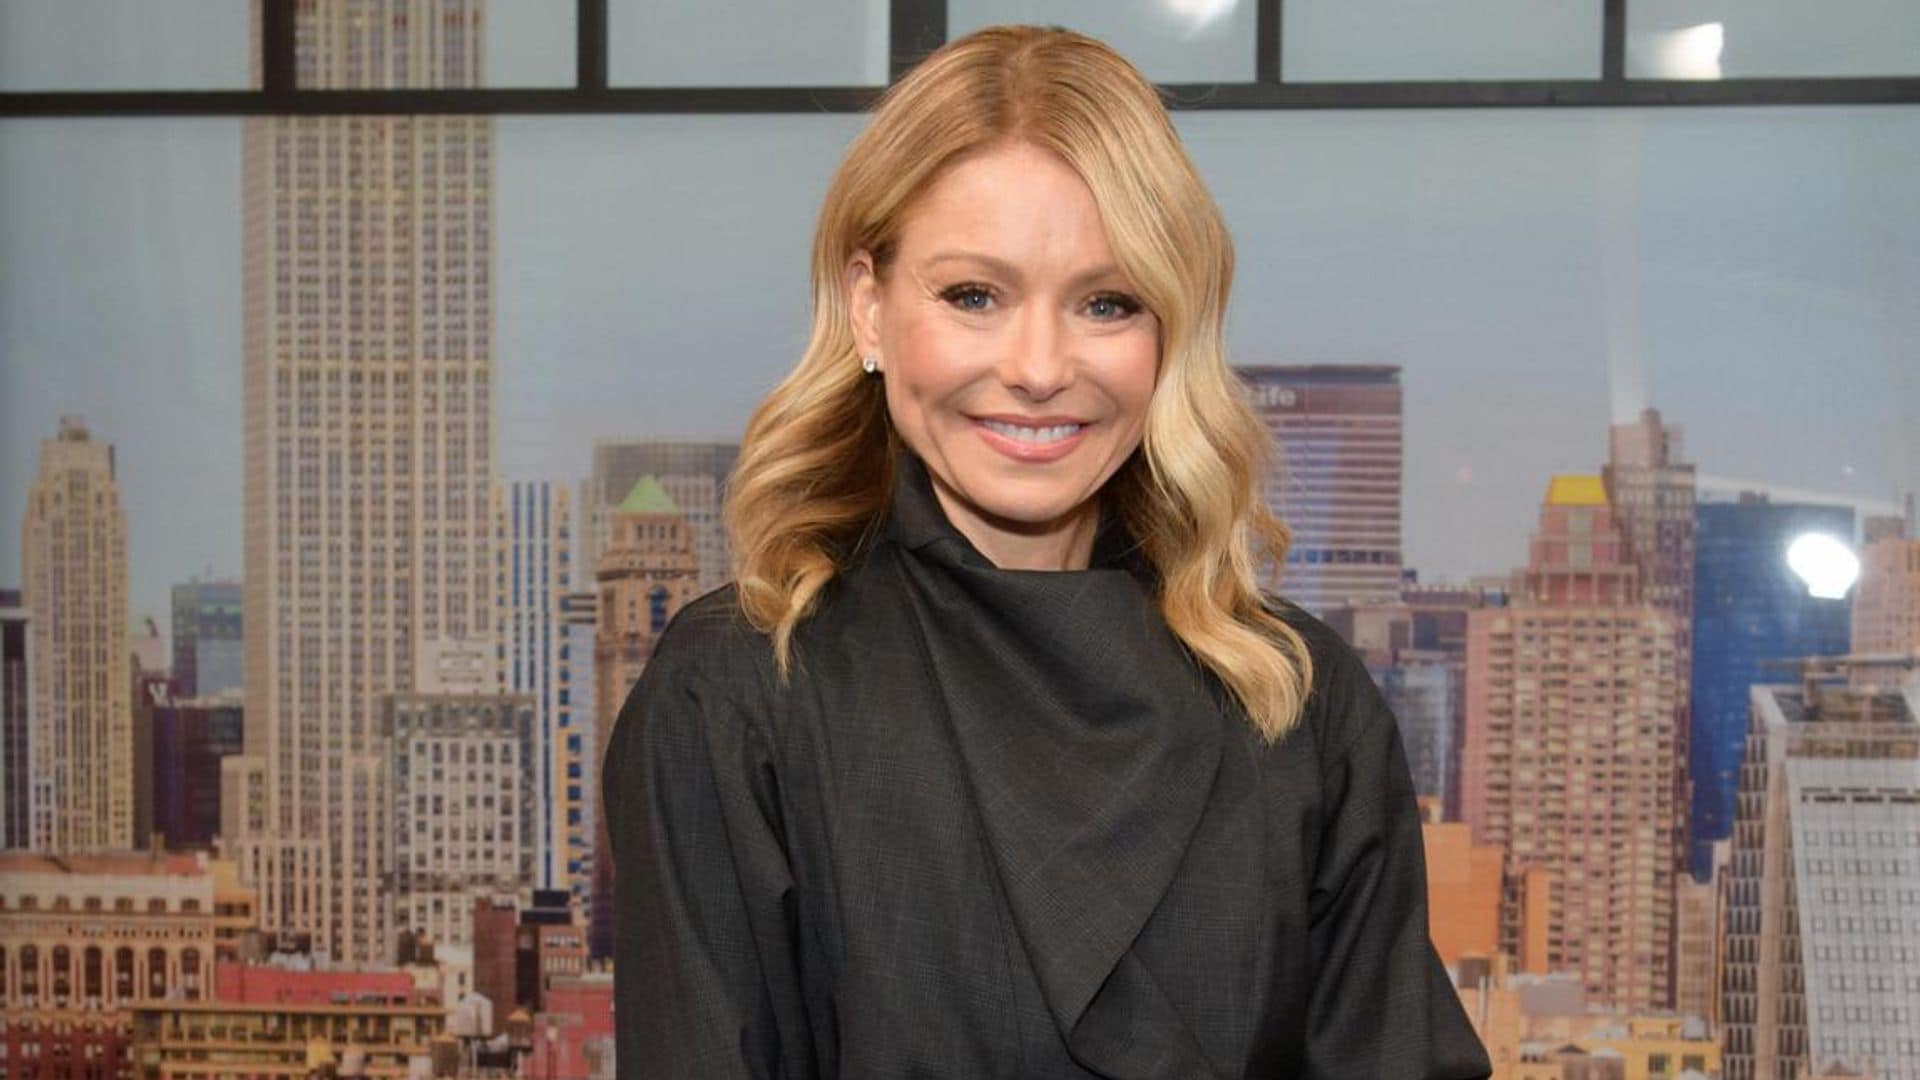 Kelly Ripa credits a plant-based diet for giving her healthy, youthful skin